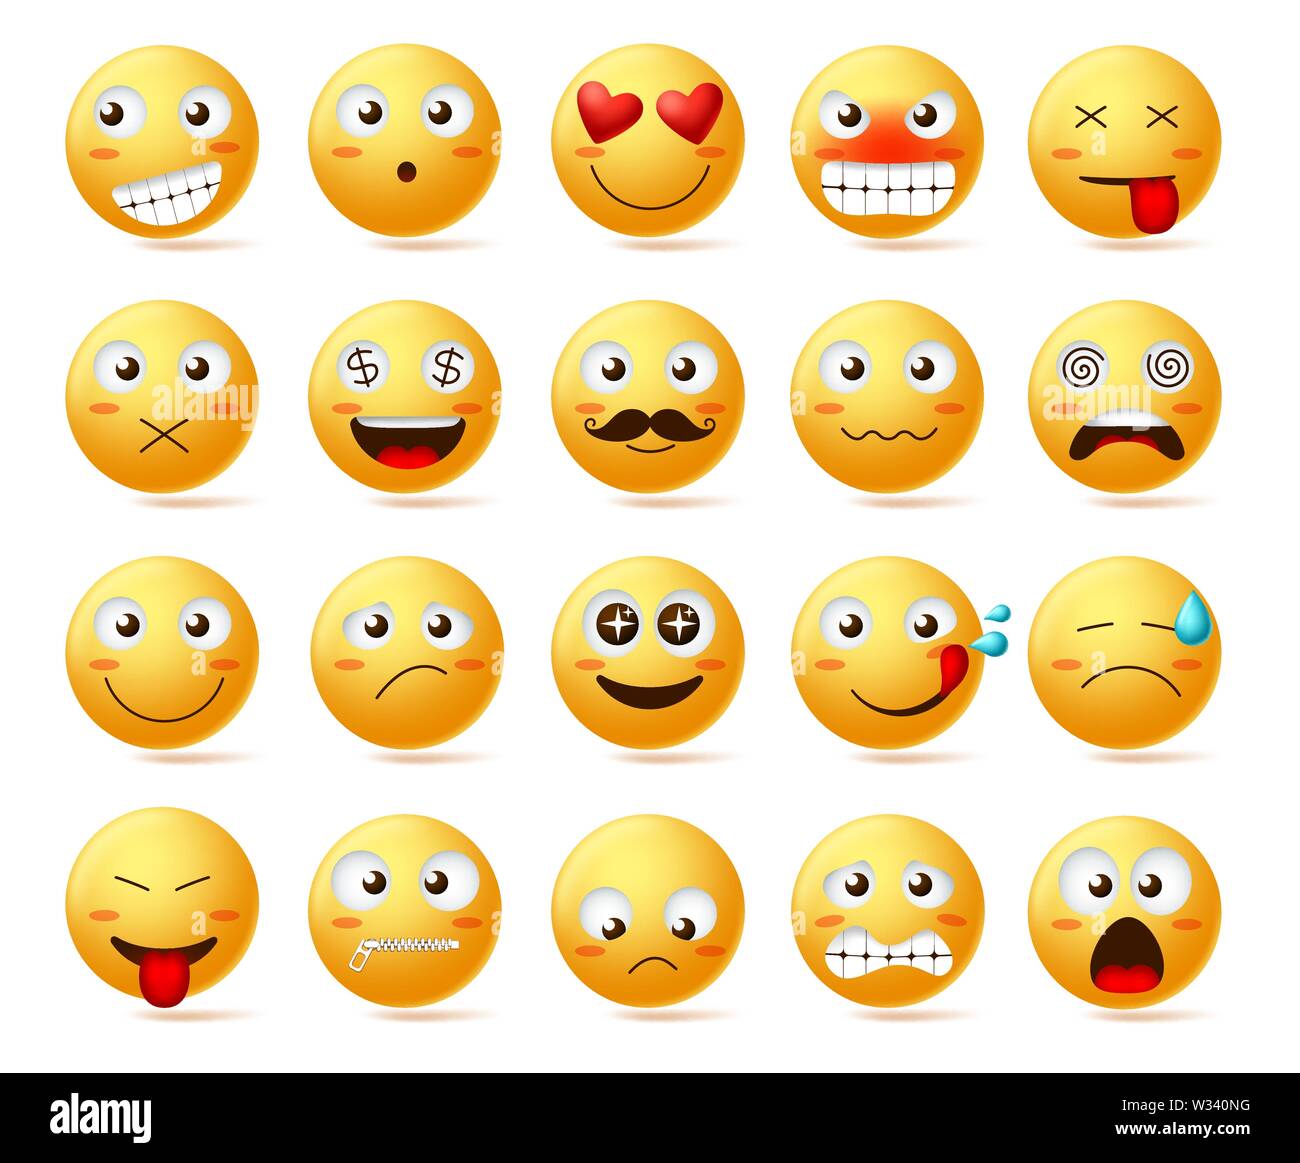 Smileys vector icon set. Smiley face or yellow emoticons with facial expressions and emotions like happy, inlove, confused and dizzy isolated in white Stock Vector